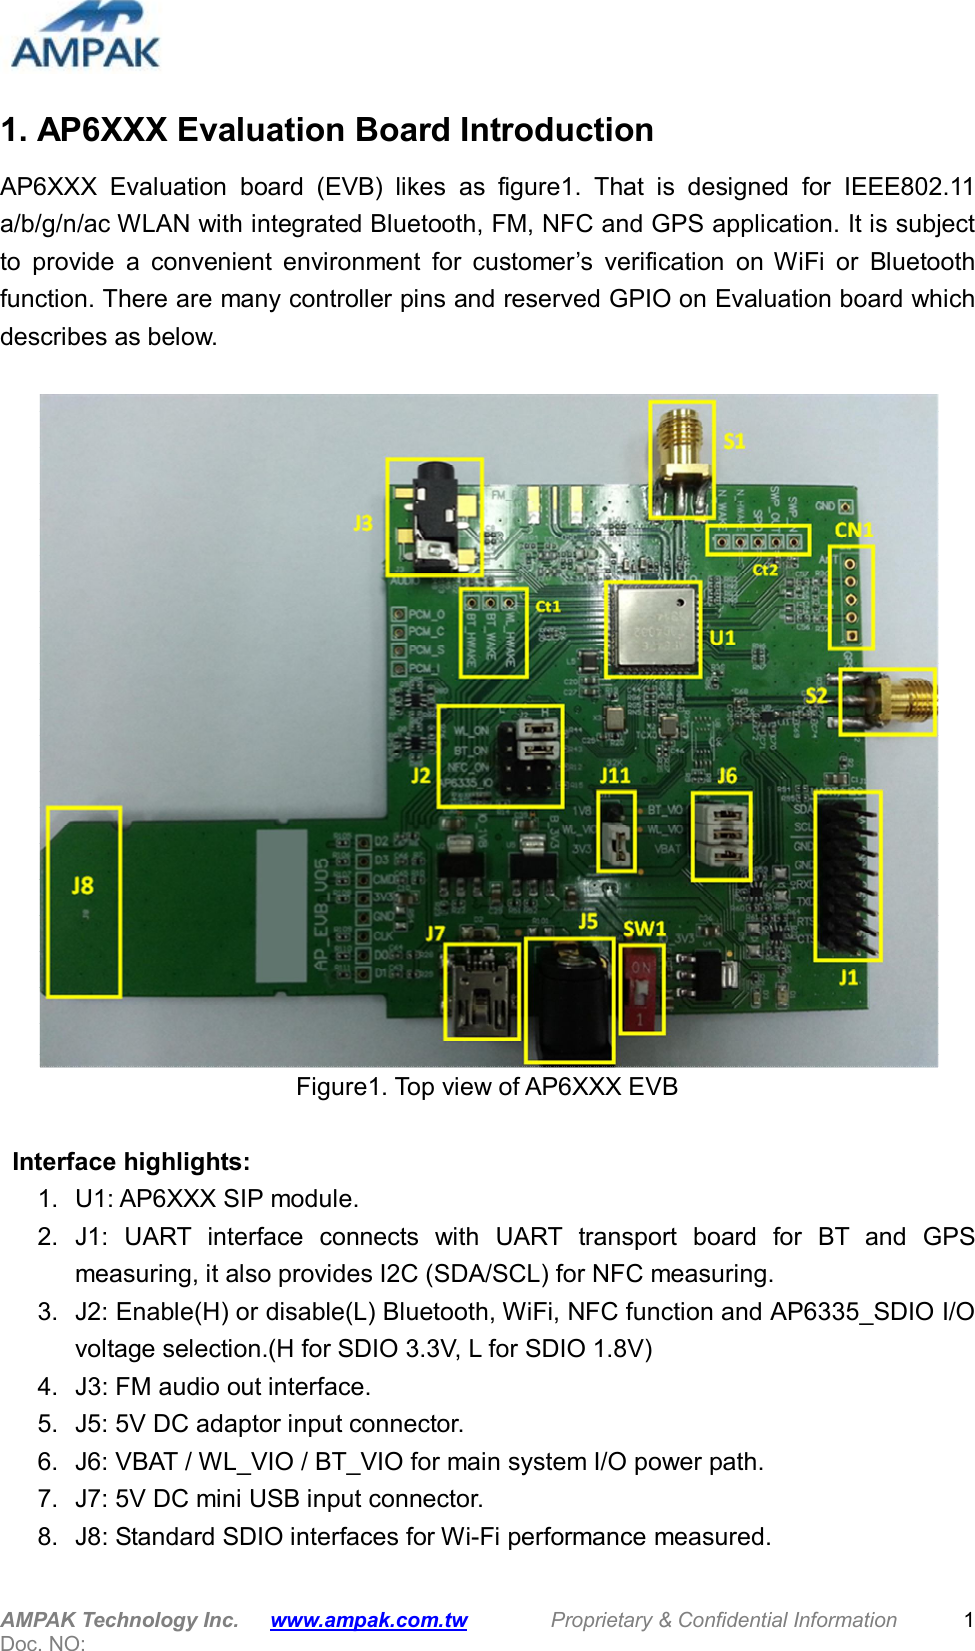  AMPAK Technology Inc.      www.ampak.com.tw        Proprietary &amp; Confidential Information   Doc. NO:   1 1. AP6XXX Evaluation Board Introduction AP6XXX  Evaluation  board  (EVB)  likes  as  figure1.  That  is  designed  for  IEEE802.11 a/b/g/n/ac WLAN with integrated Bluetooth, FM, NFC and GPS application. It is subject to  provide  a  convenient  environment  for  customer’s  verification  on  WiFi  or  Bluetooth function. There are many controller pins and reserved GPIO on Evaluation board which describes as below.   Figure1. Top view of AP6XXX EVB    Interface highlights: 1.  U1: AP6XXX SIP module. 2.  J1:  UART  interface  connects  with  UART  transport  board  for  BT  and  GPS measuring, it also provides I2C (SDA/SCL) for NFC measuring. 3.  J2: Enable(H) or disable(L) Bluetooth, WiFi, NFC function and AP6335_SDIO I/O voltage selection.(H for SDIO 3.3V, L for SDIO 1.8V) 4.  J3: FM audio out interface. 5.  J5: 5V DC adaptor input connector. 6.  J6: VBAT / WL_VIO / BT_VIO for main system I/O power path. 7.  J7: 5V DC mini USB input connector. 8.  J8: Standard SDIO interfaces for Wi-Fi performance measured. 